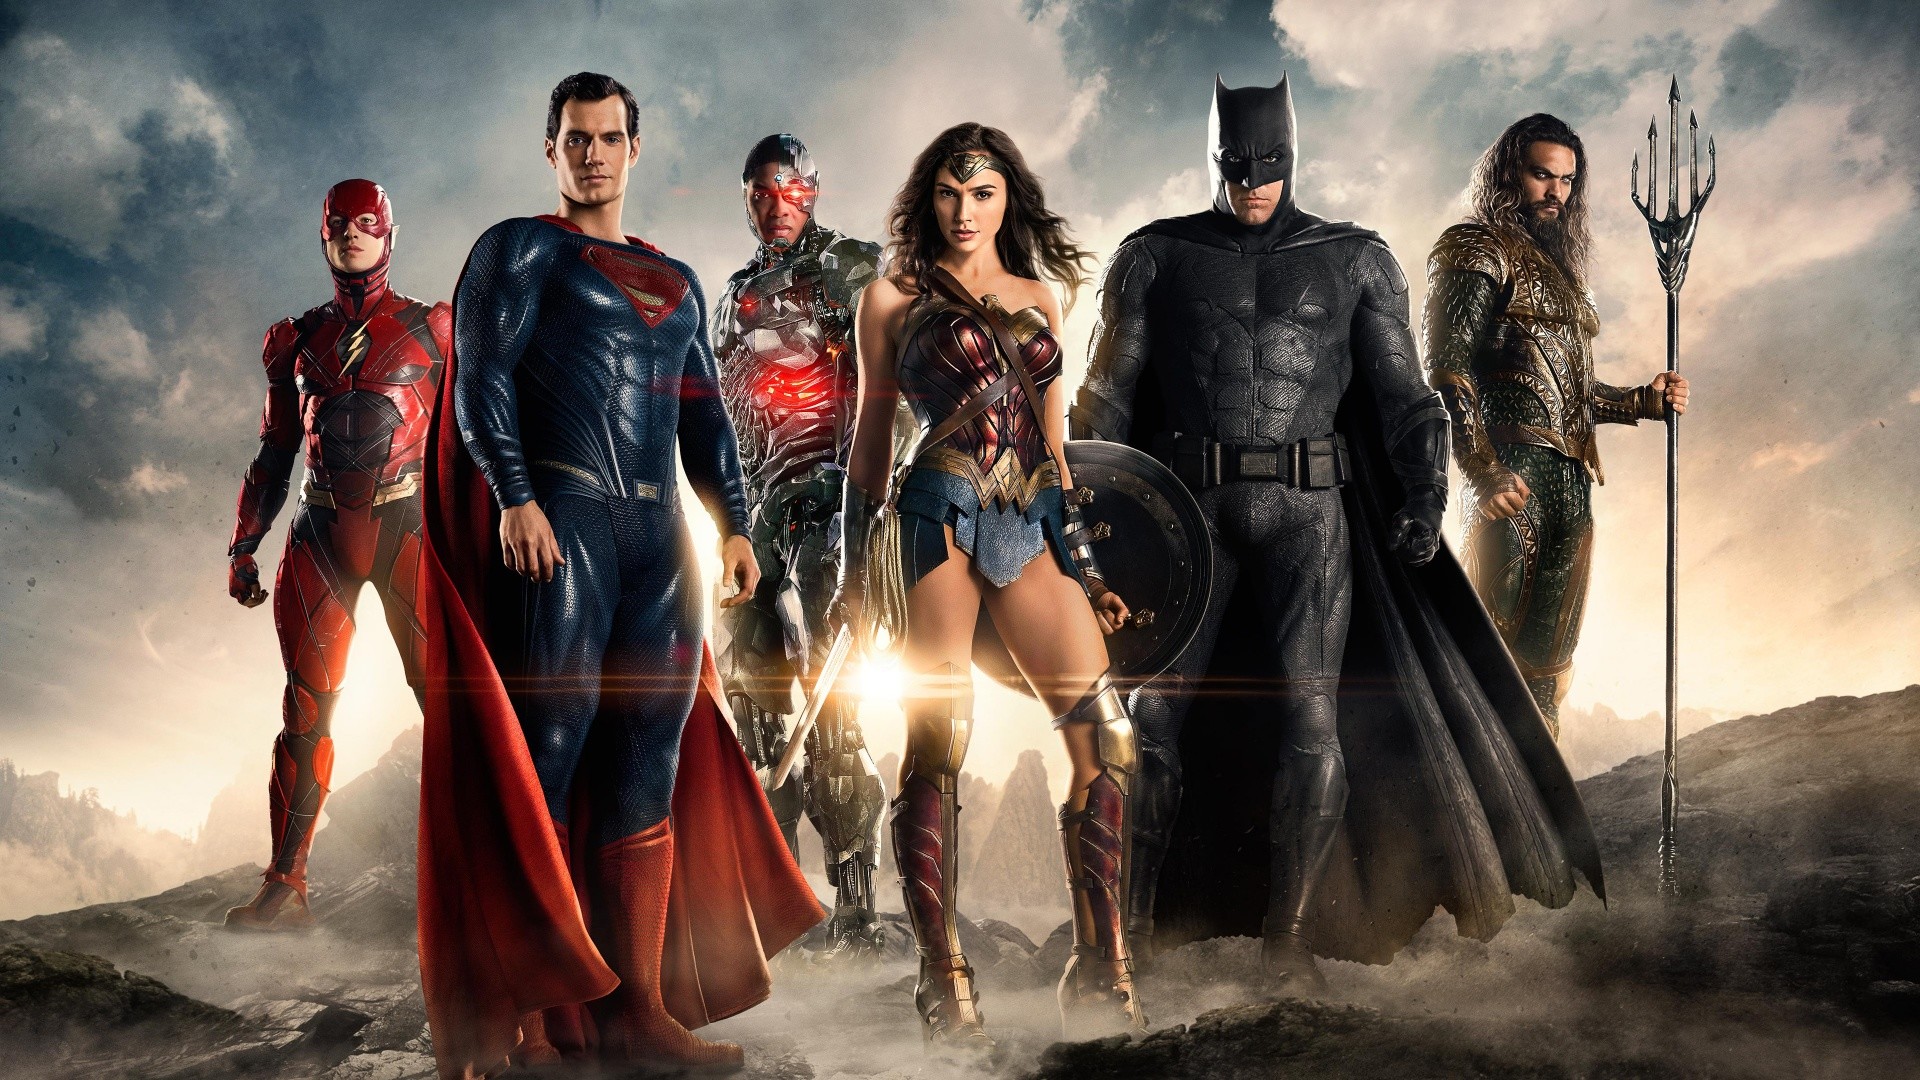 1920x1080 Justice League 2017 Movie Wallpapers